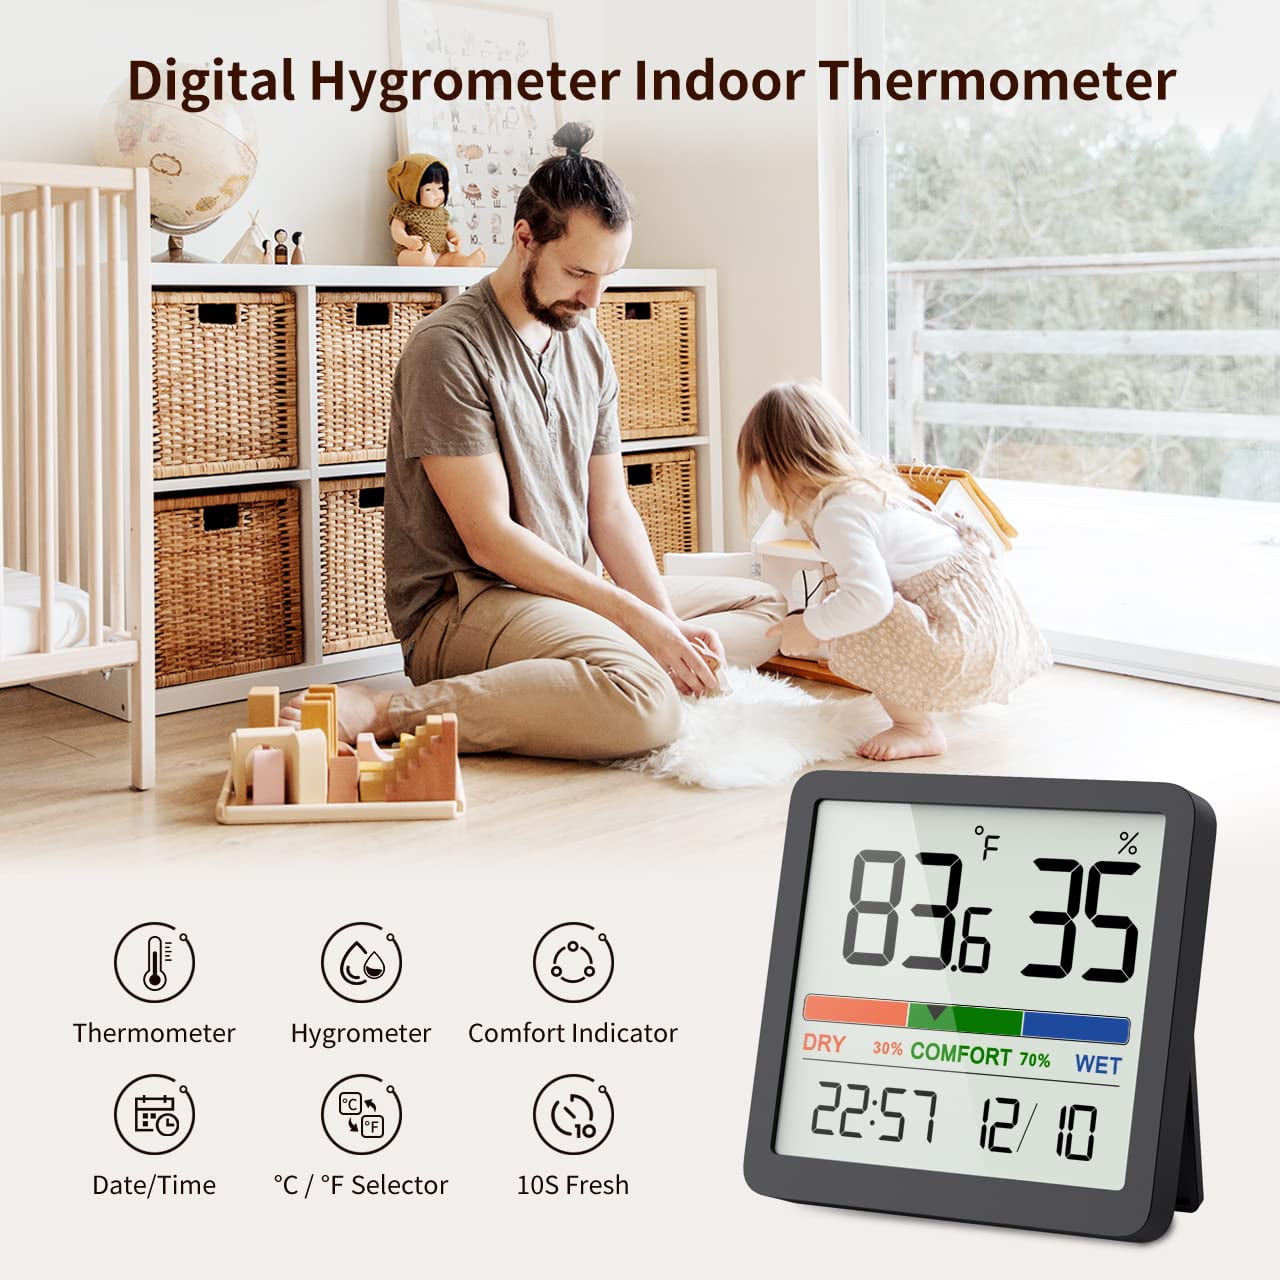 Hygrometer Indoor Thermometer, Desktop Digital Thermometer with Temperature  and Humidity Monitor, Accurate Humidity Gauge Room Thermometer with Clock  for Home Garage Greenhouse Wine Cellar 